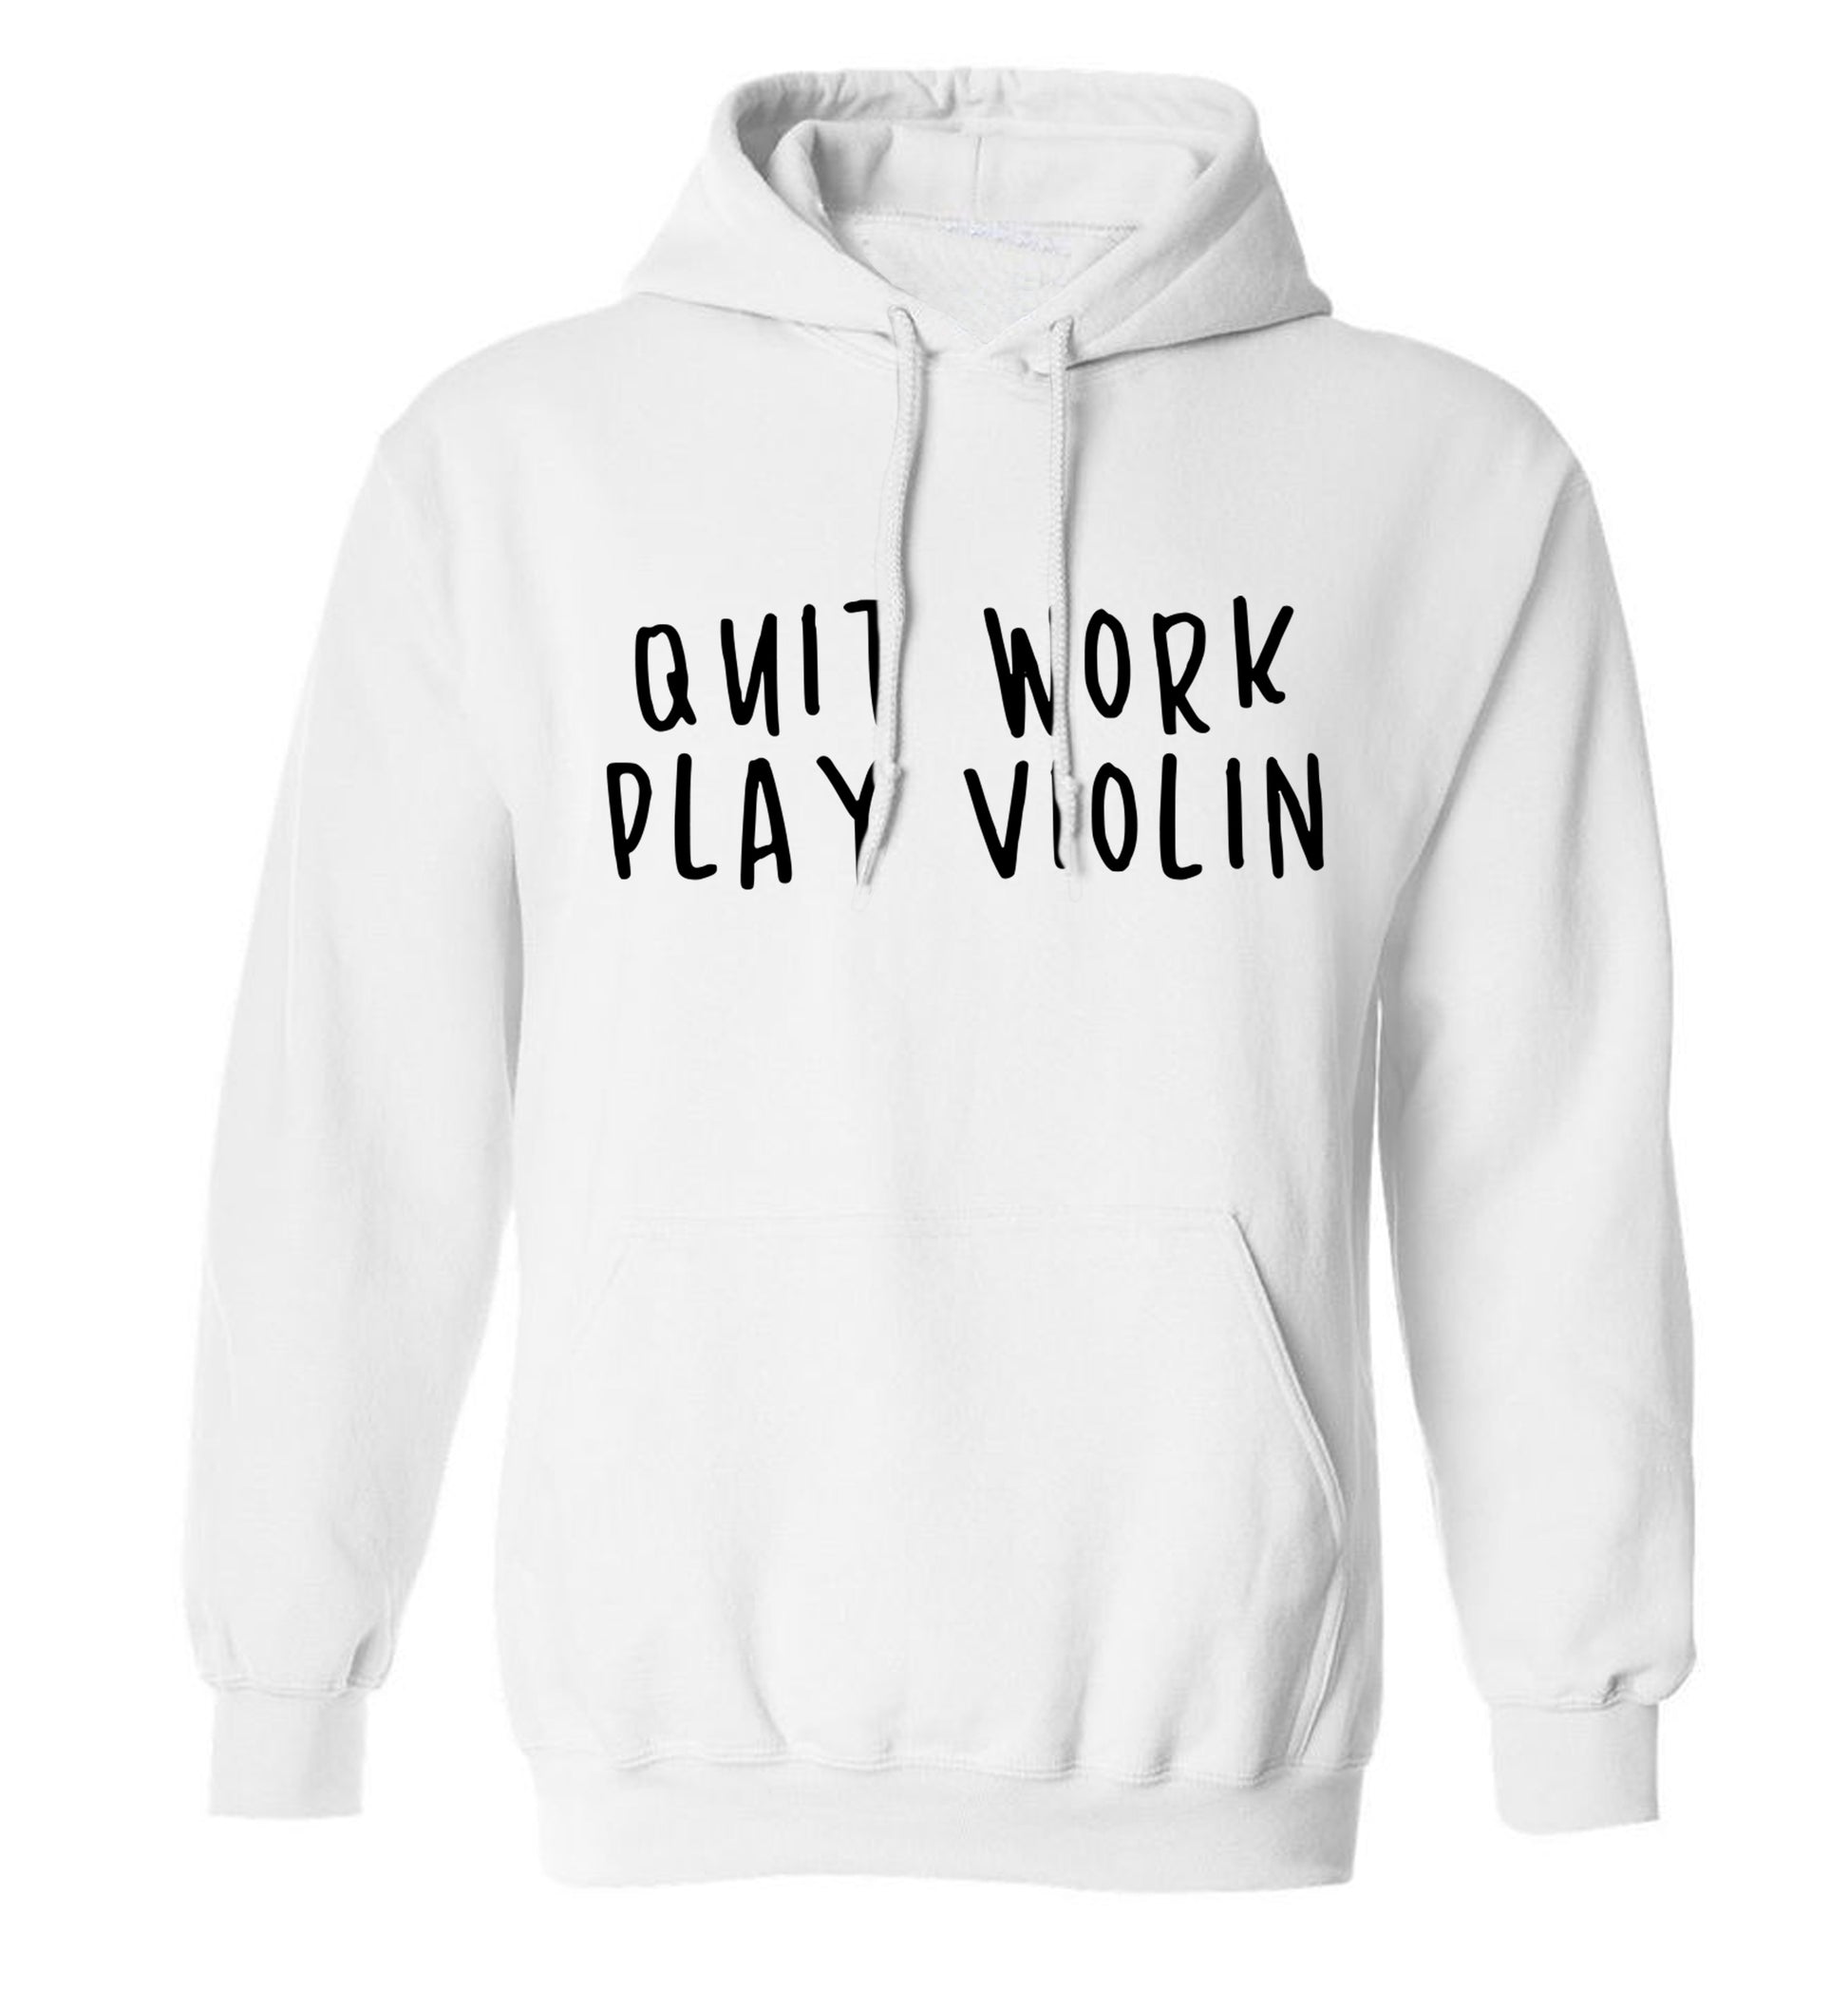 Quit work play violin adults unisex white hoodie 2XL